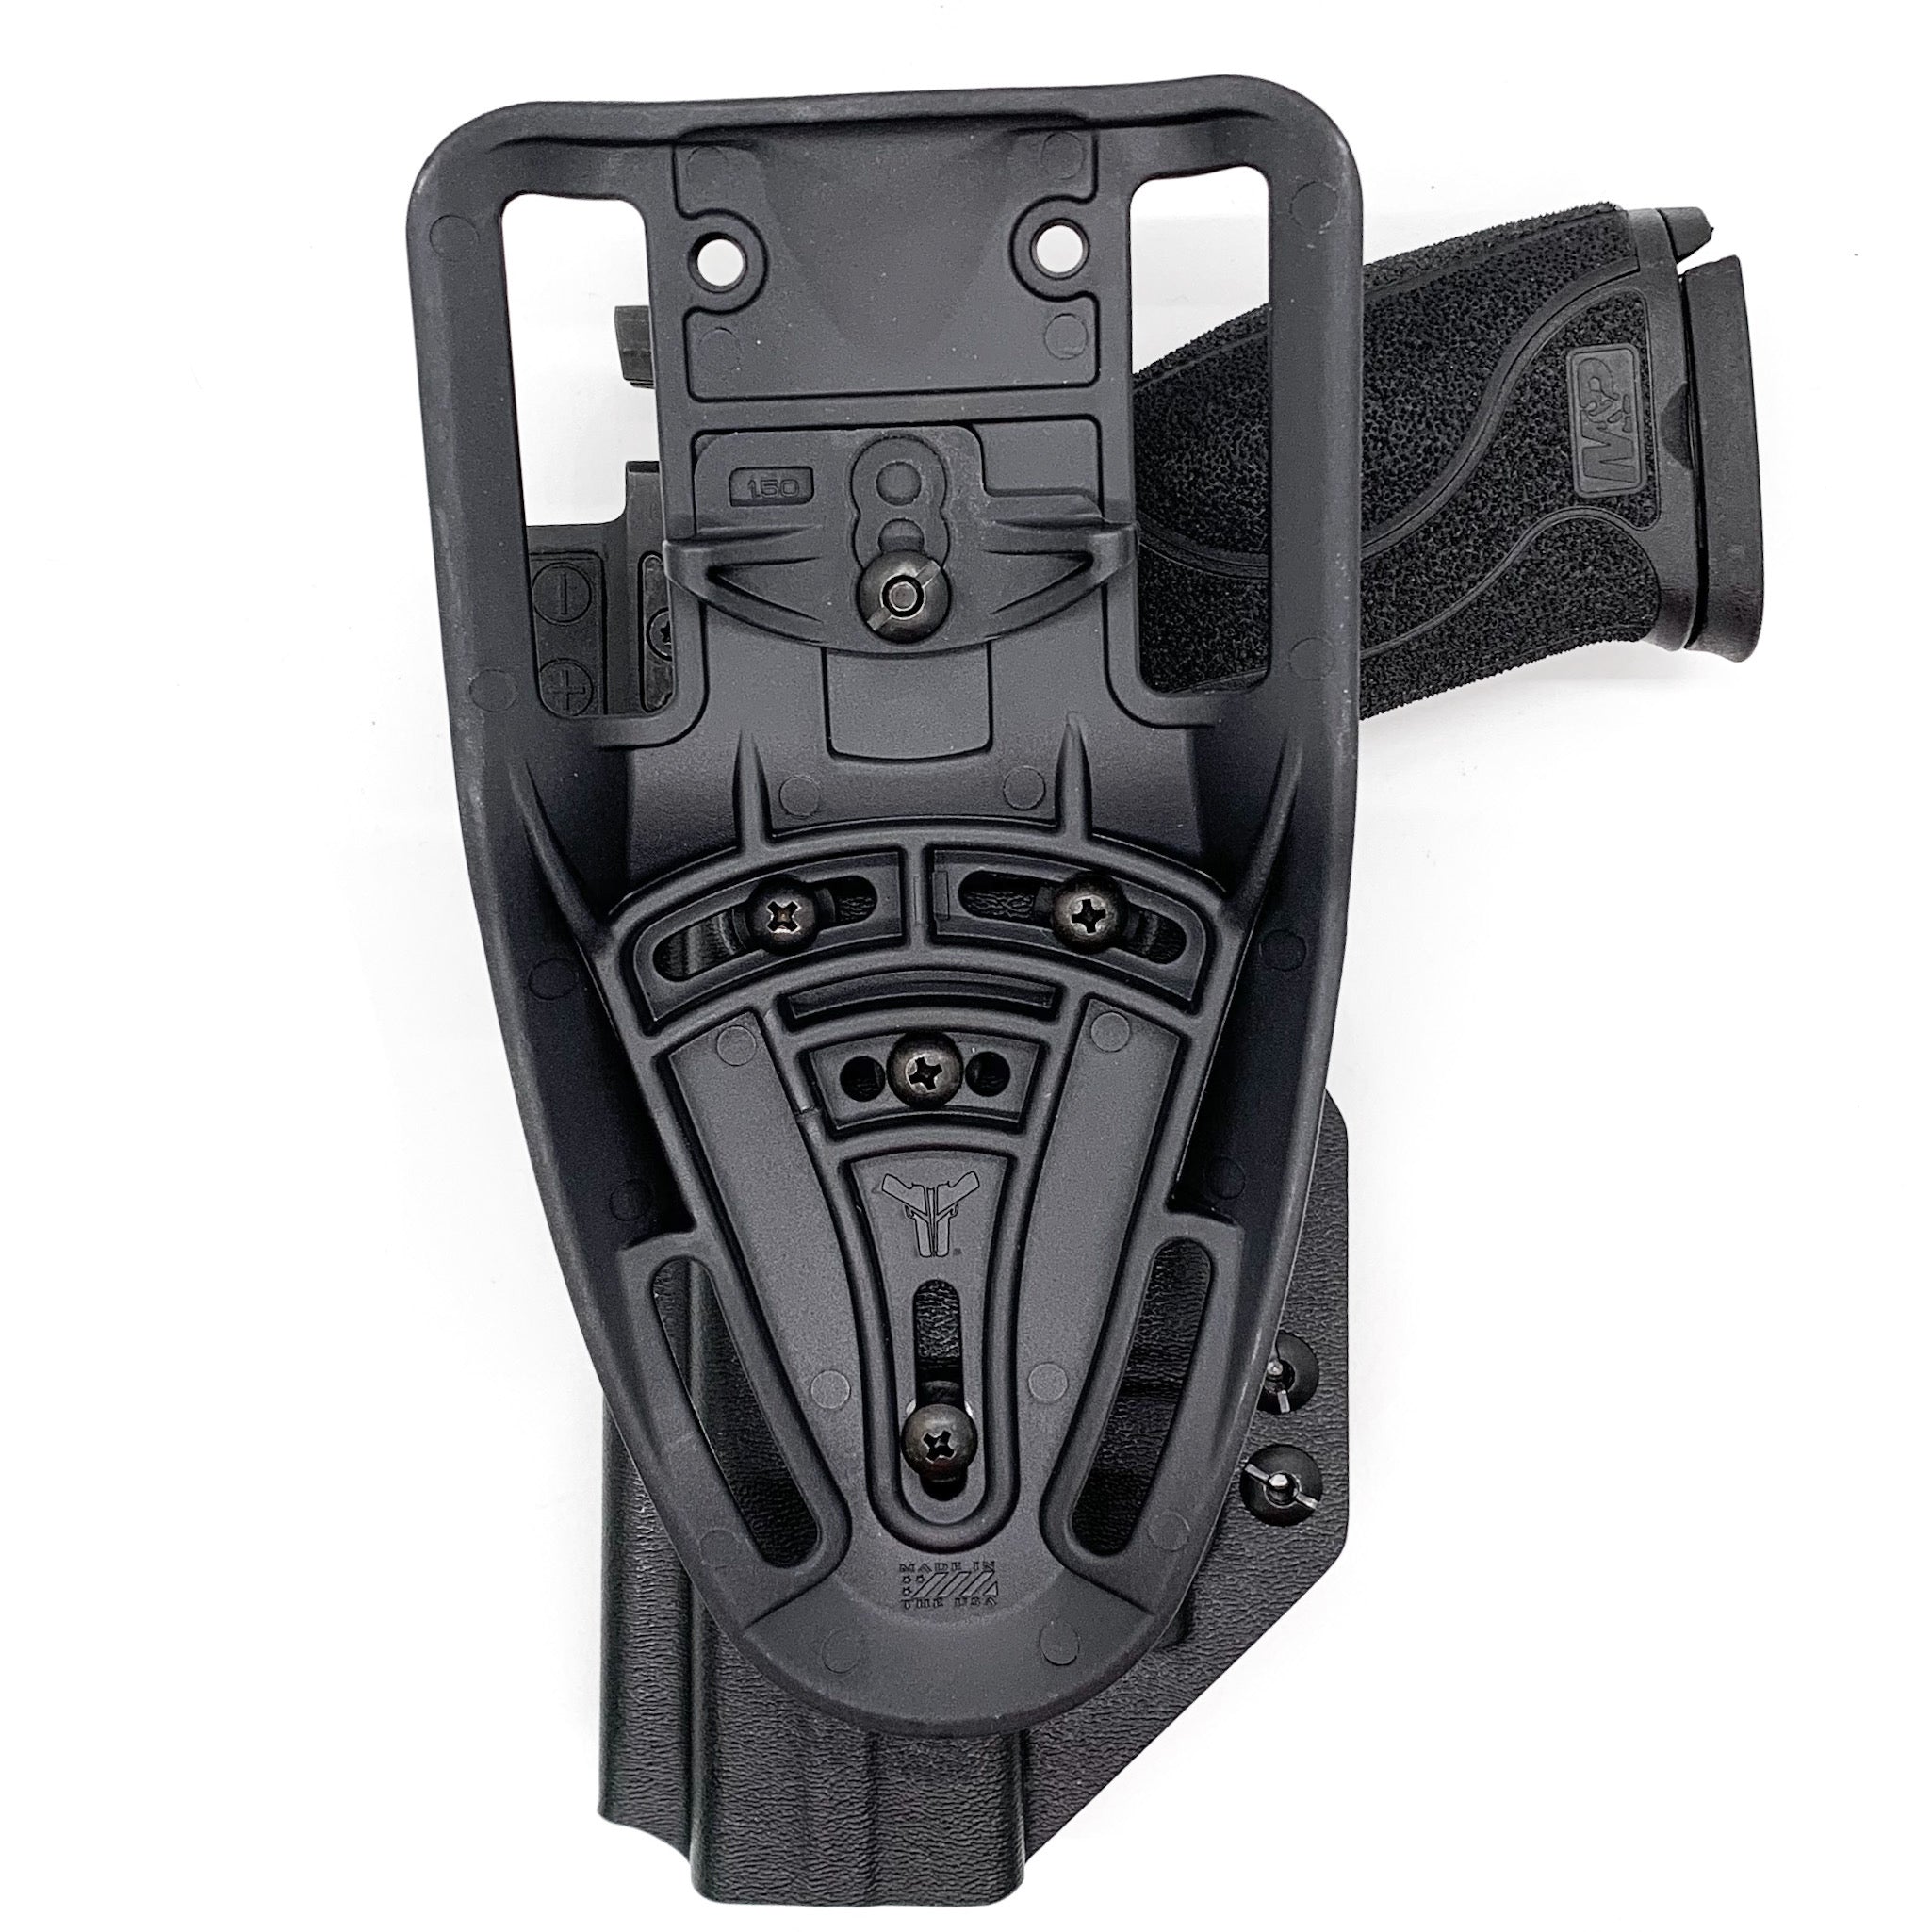 For the best Outside Waistband Kydex Duty & Competition Holster for the Smith and Wesson M&P 4.6" 10MM M2.0 pistol with thumb safety and Streamlight TLR-7, TLR-7A or TLR-7X shop Four Brothers Holsters. Full sweat guard, adjustable retention, cleared for red dot sights. Made in the USA for veterans and law enforcement.